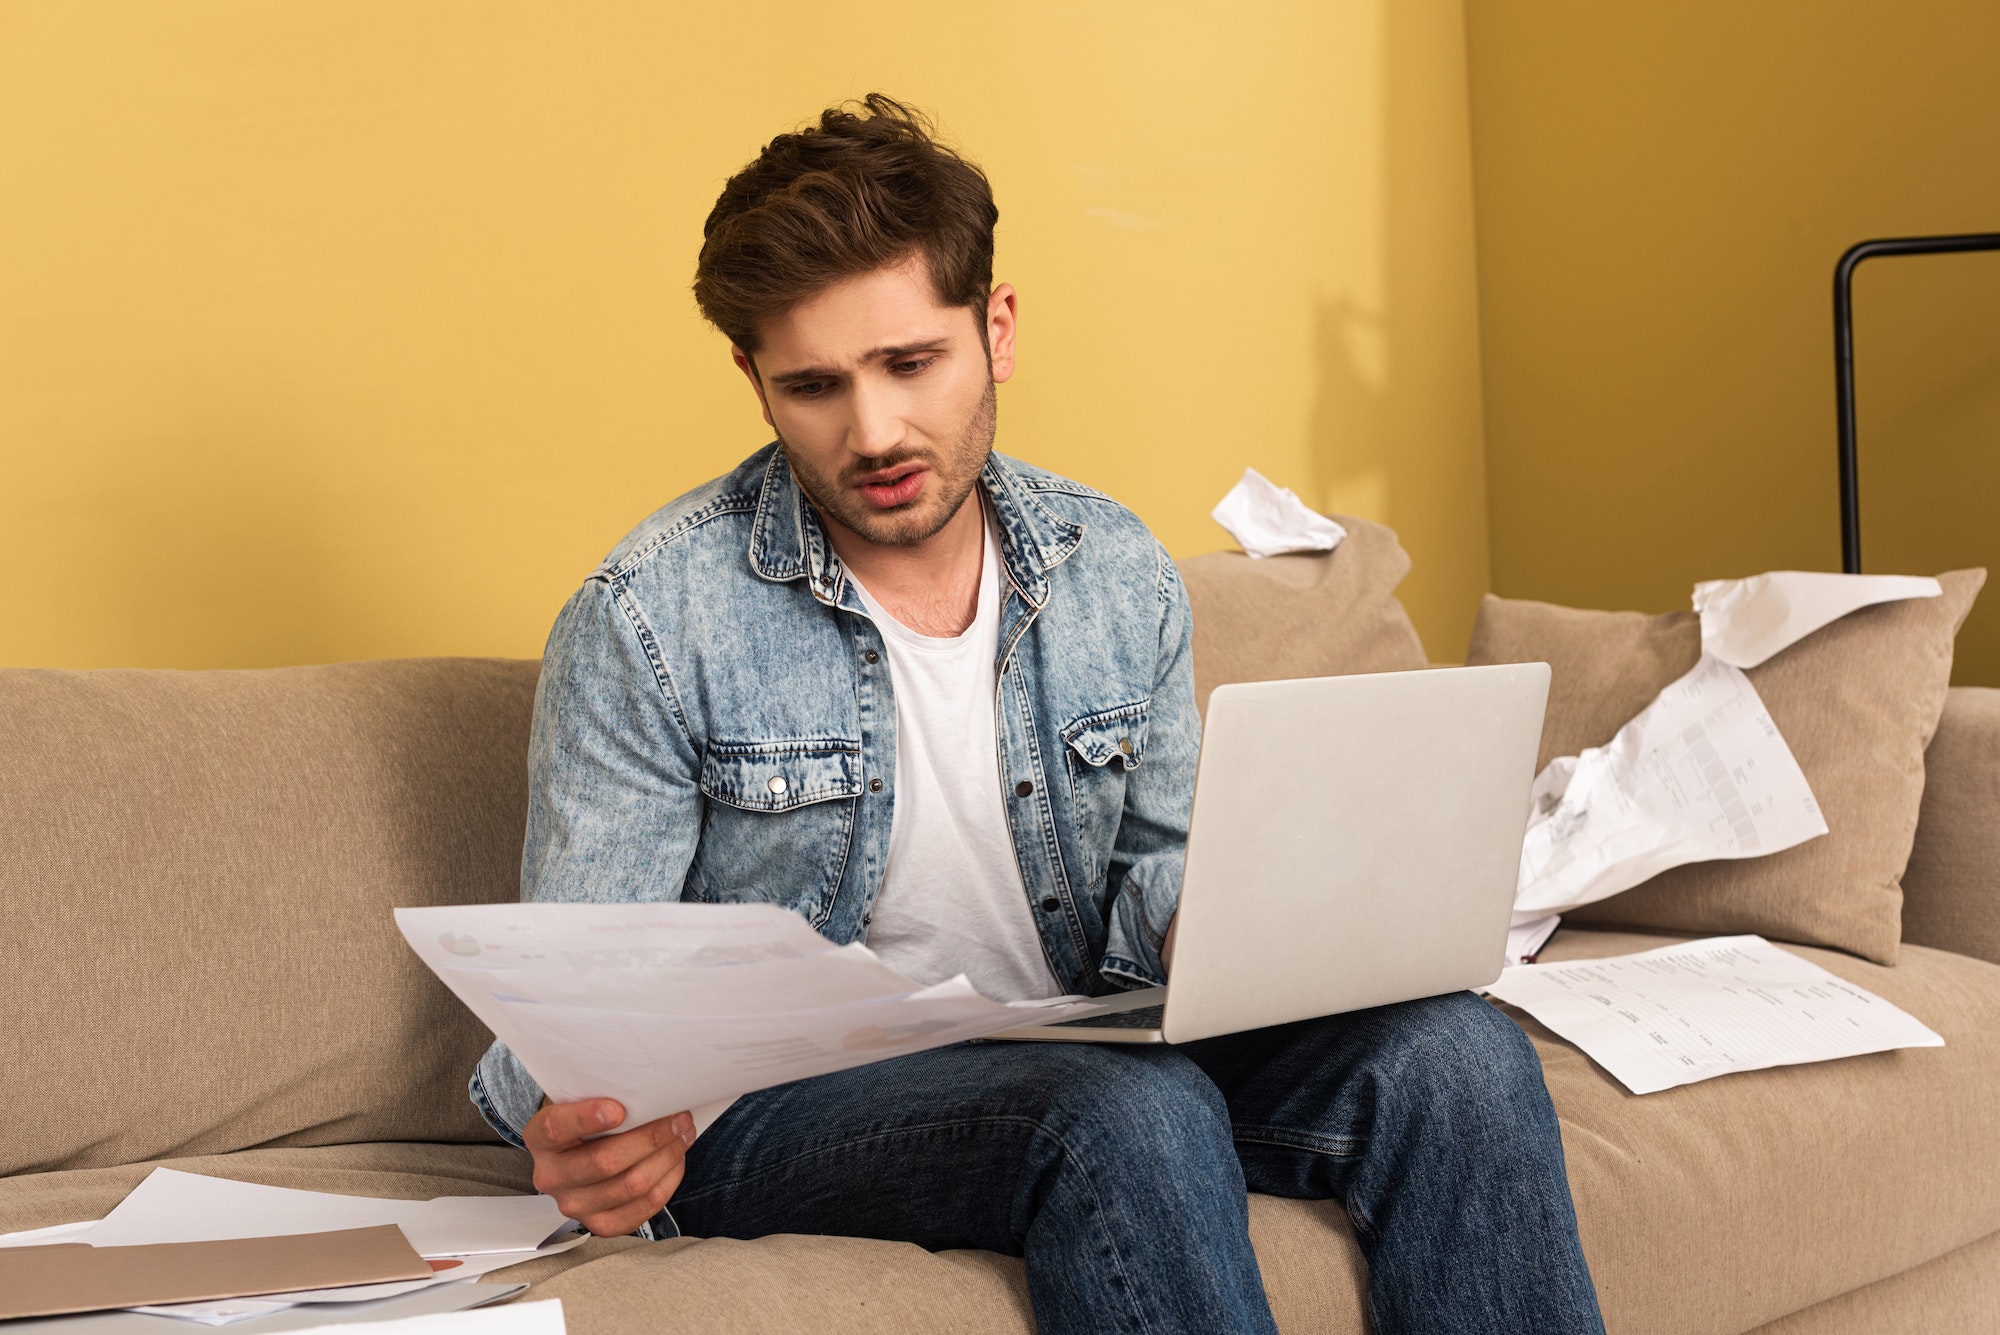 Sad man working with papers and laptop on couch at home